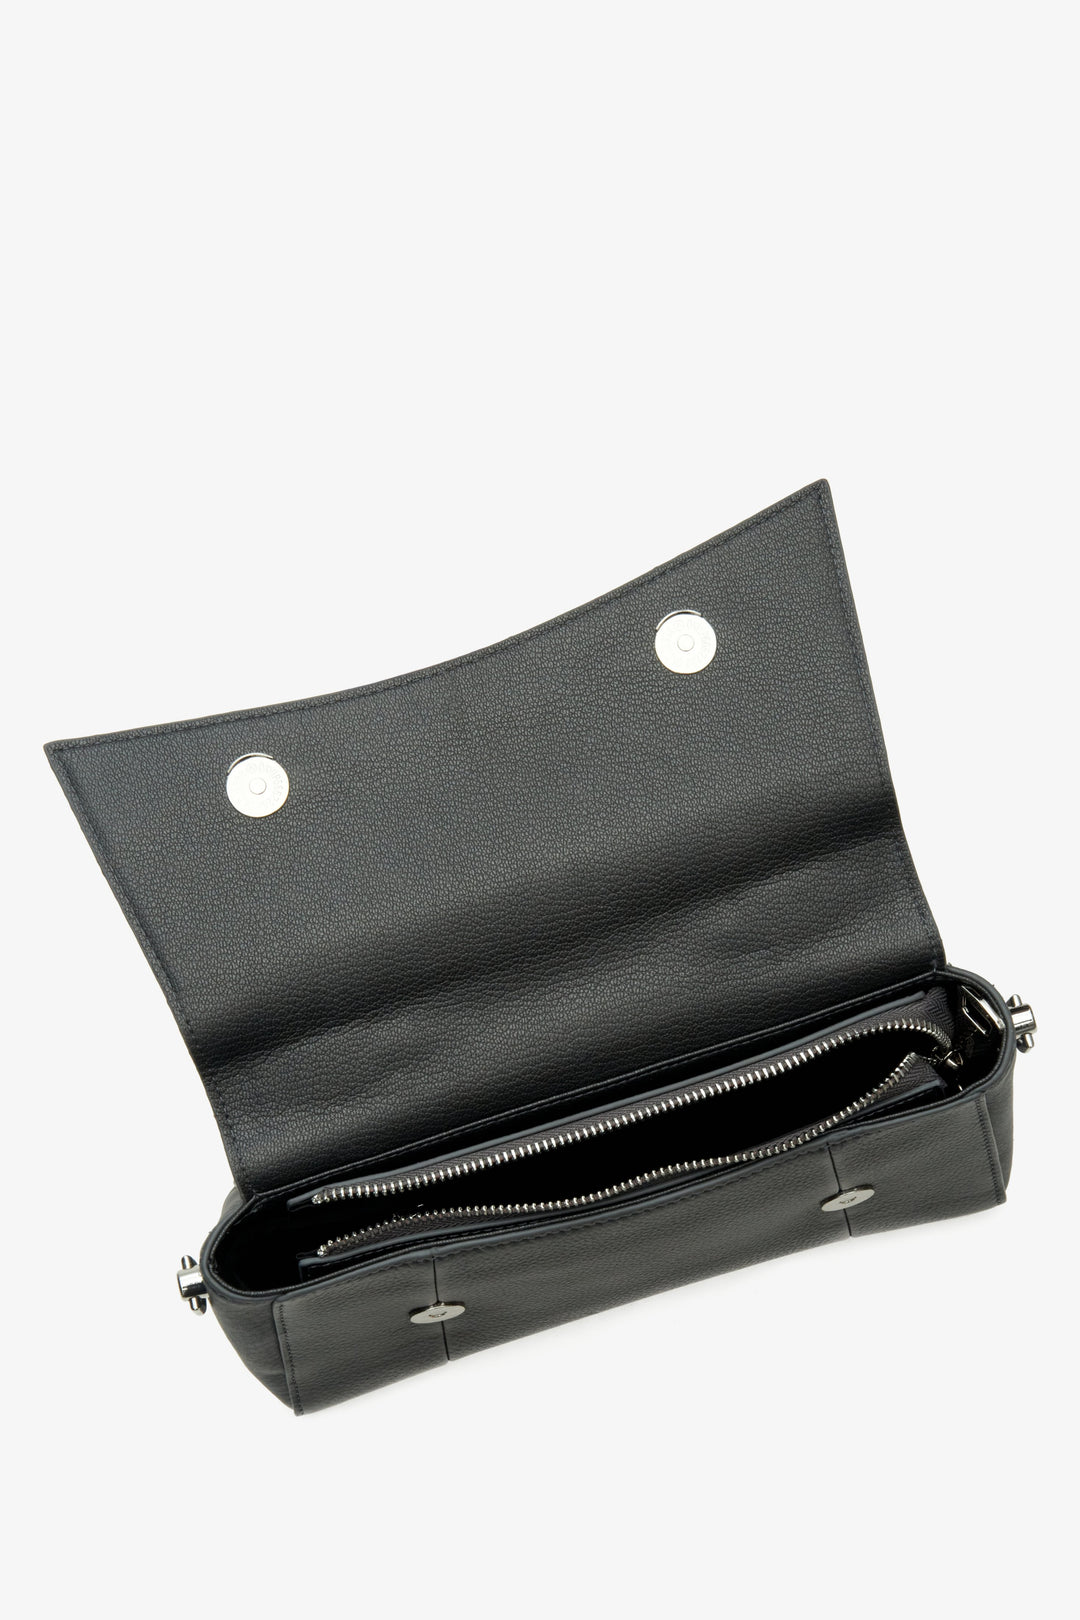 Women's leather, grey shoulder bag by Estro - close-up of the interior.